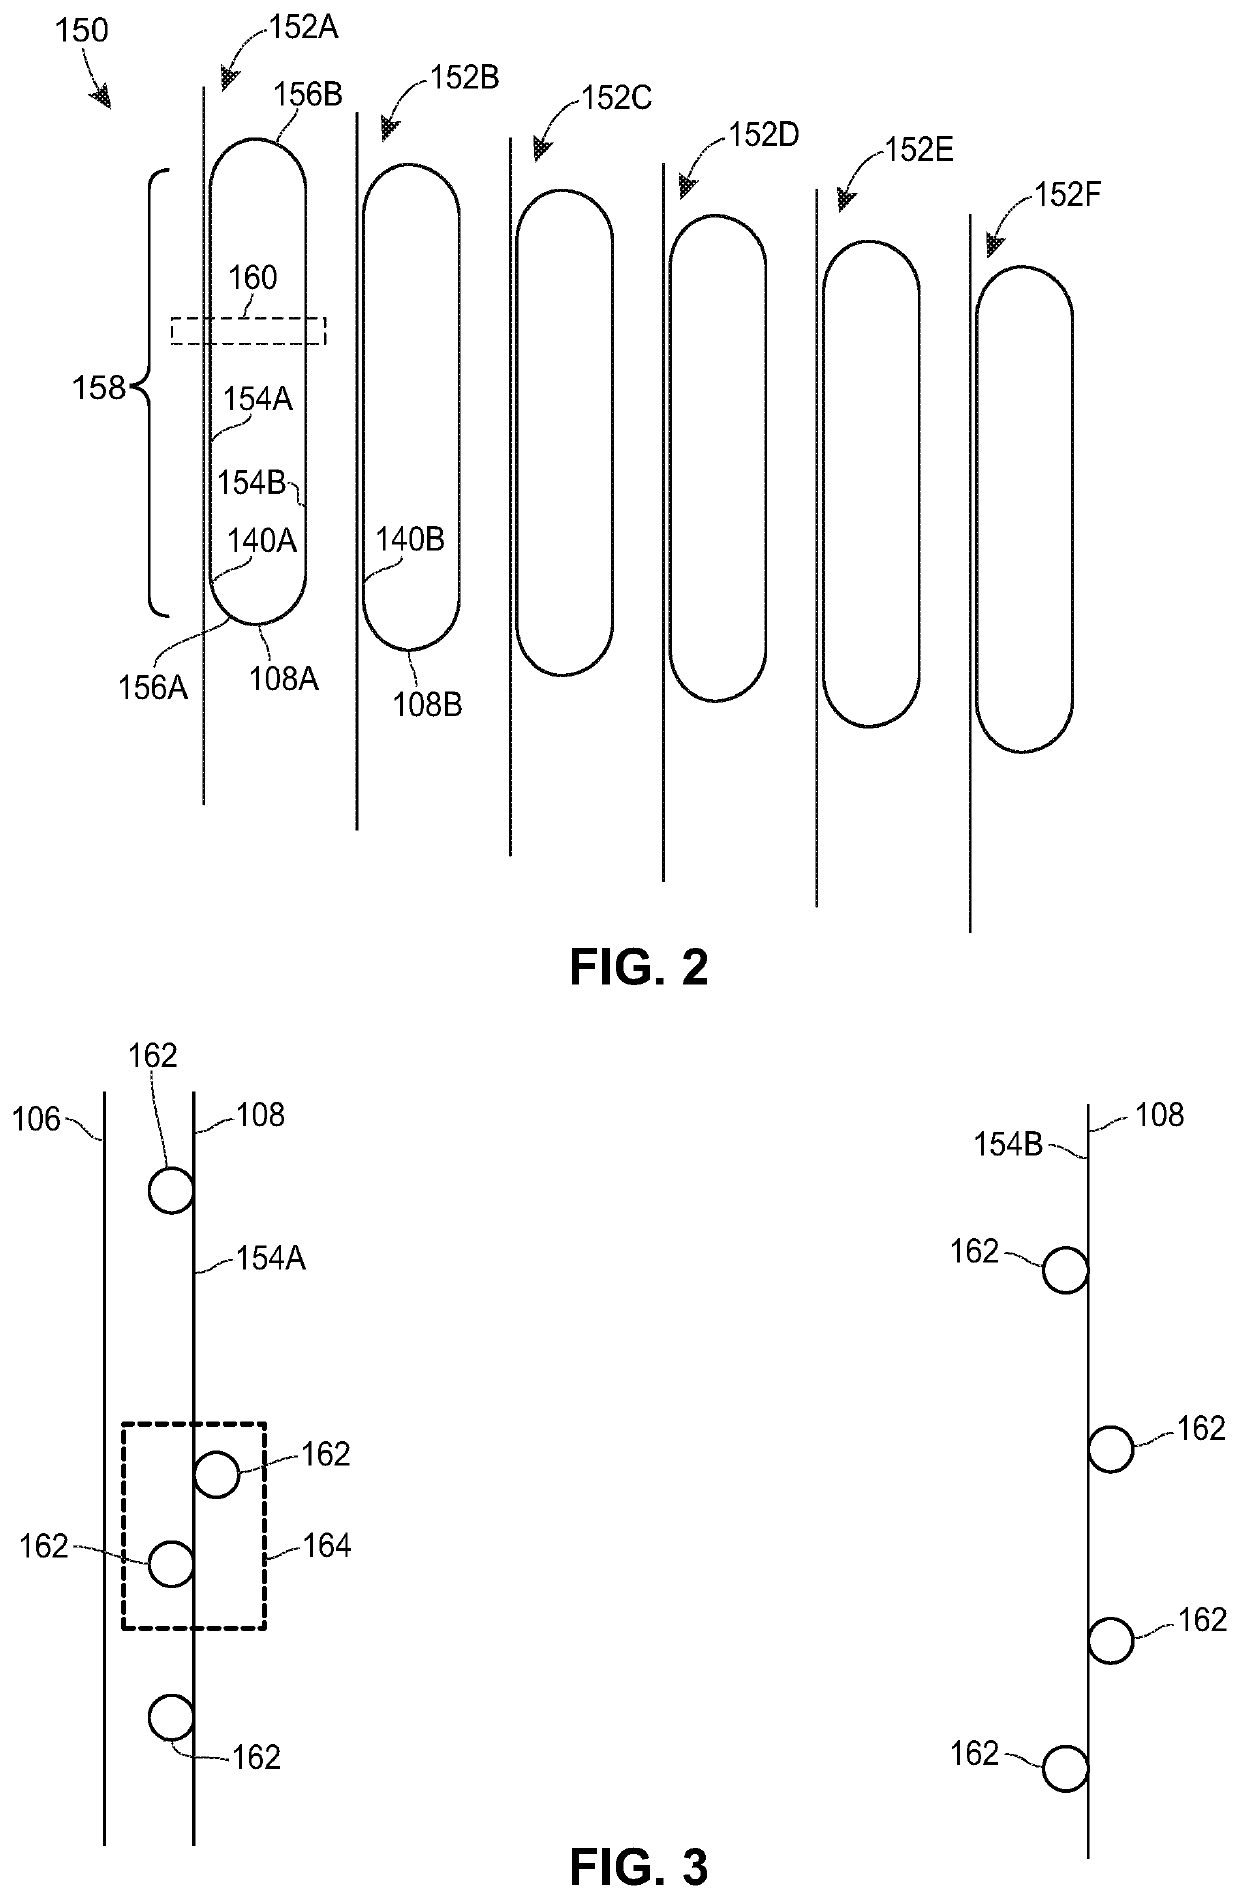 System and Method for Secondary Amplification of Refractive Detection Signals